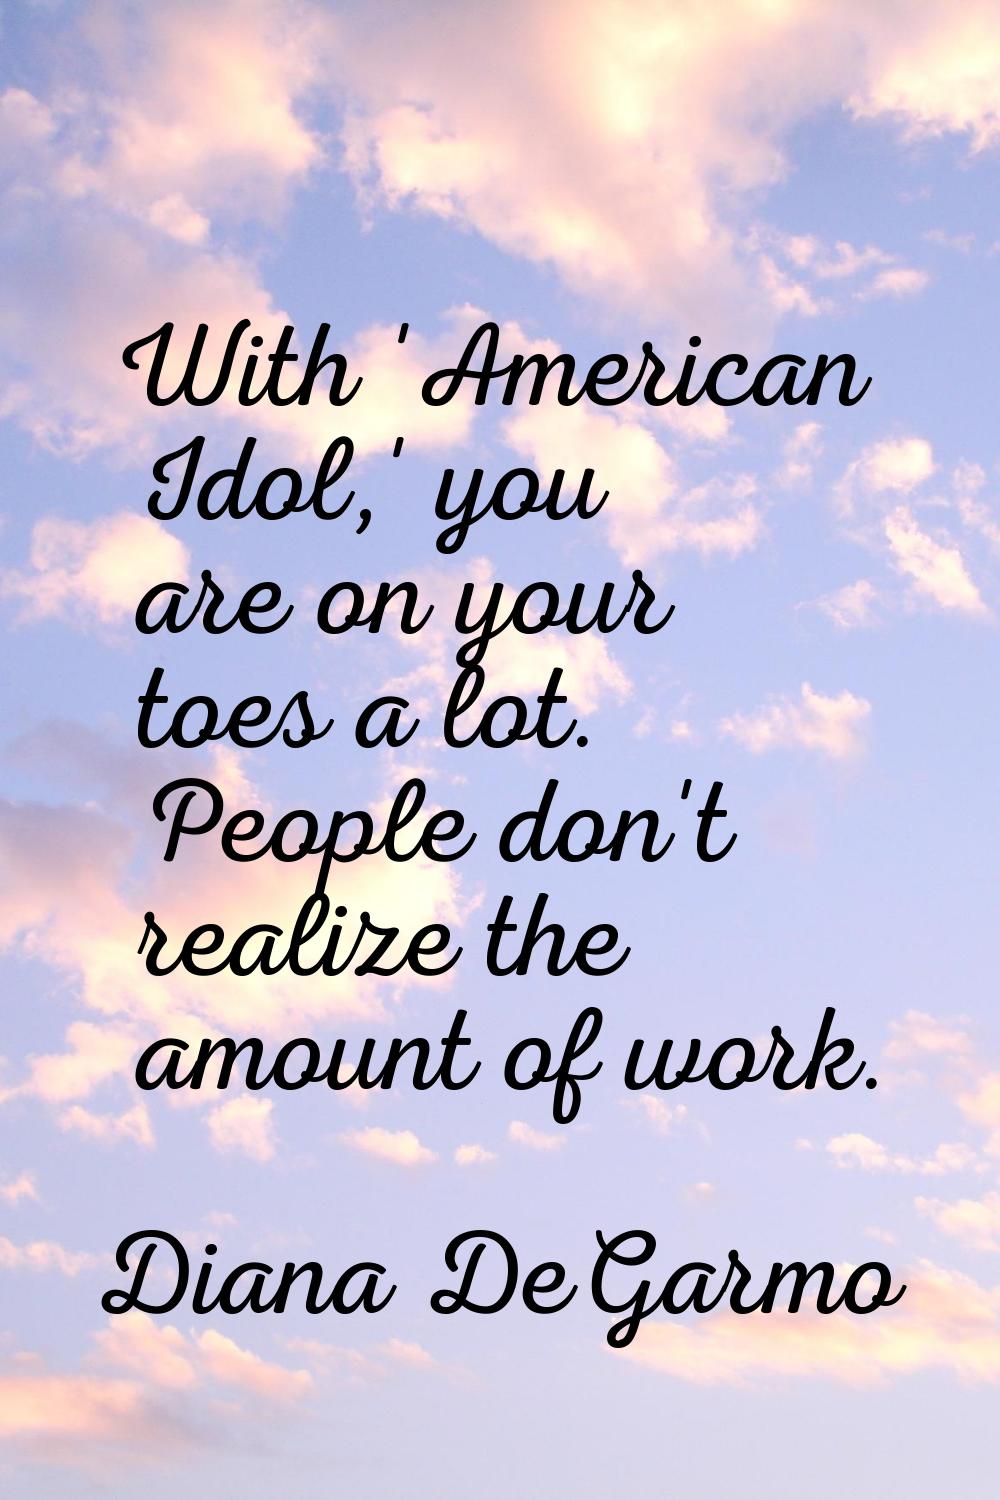 With 'American Idol,' you are on your toes a lot. People don't realize the amount of work.